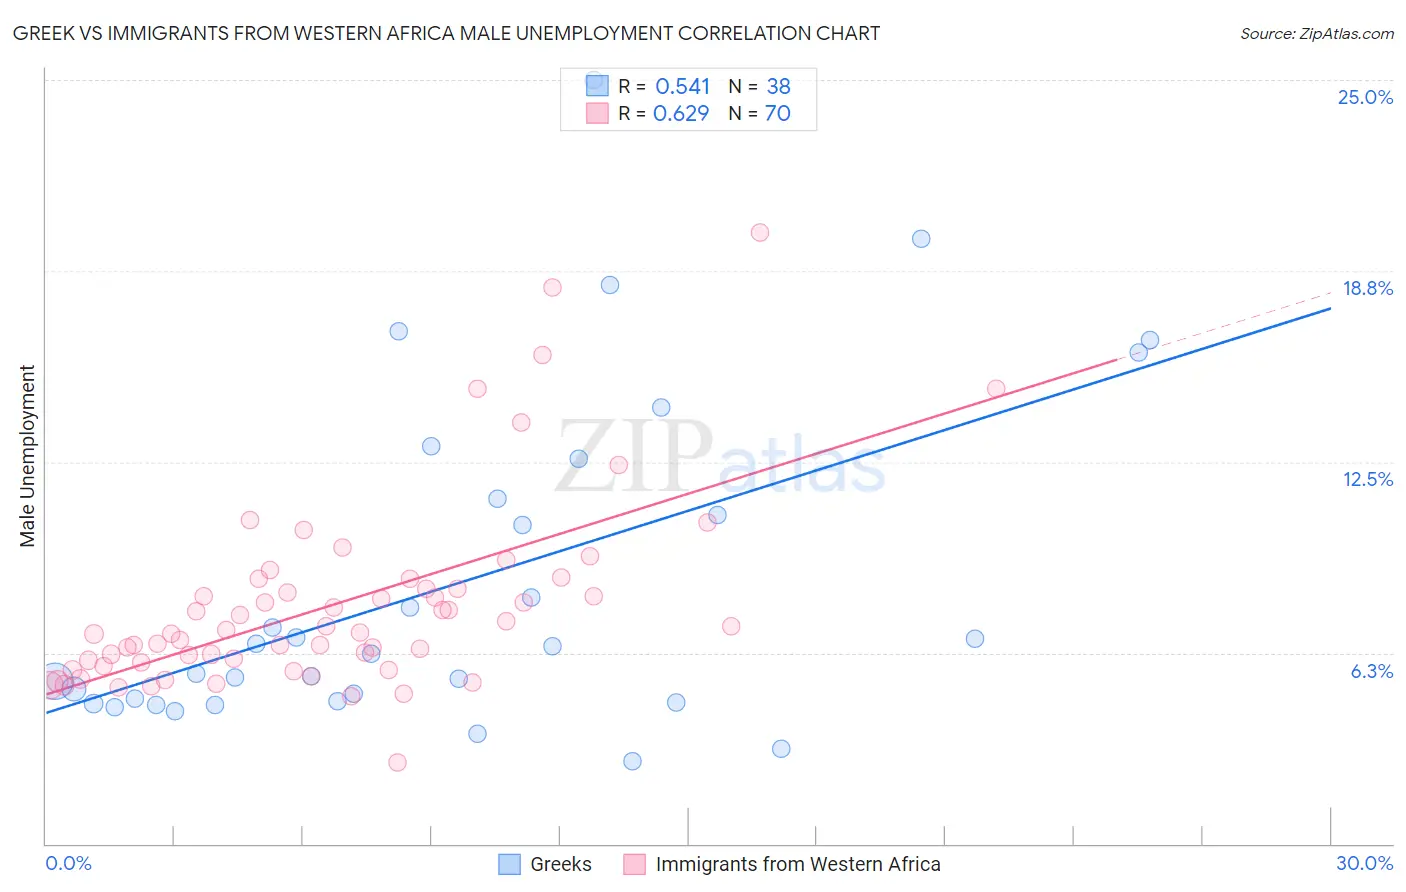 Greek vs Immigrants from Western Africa Male Unemployment